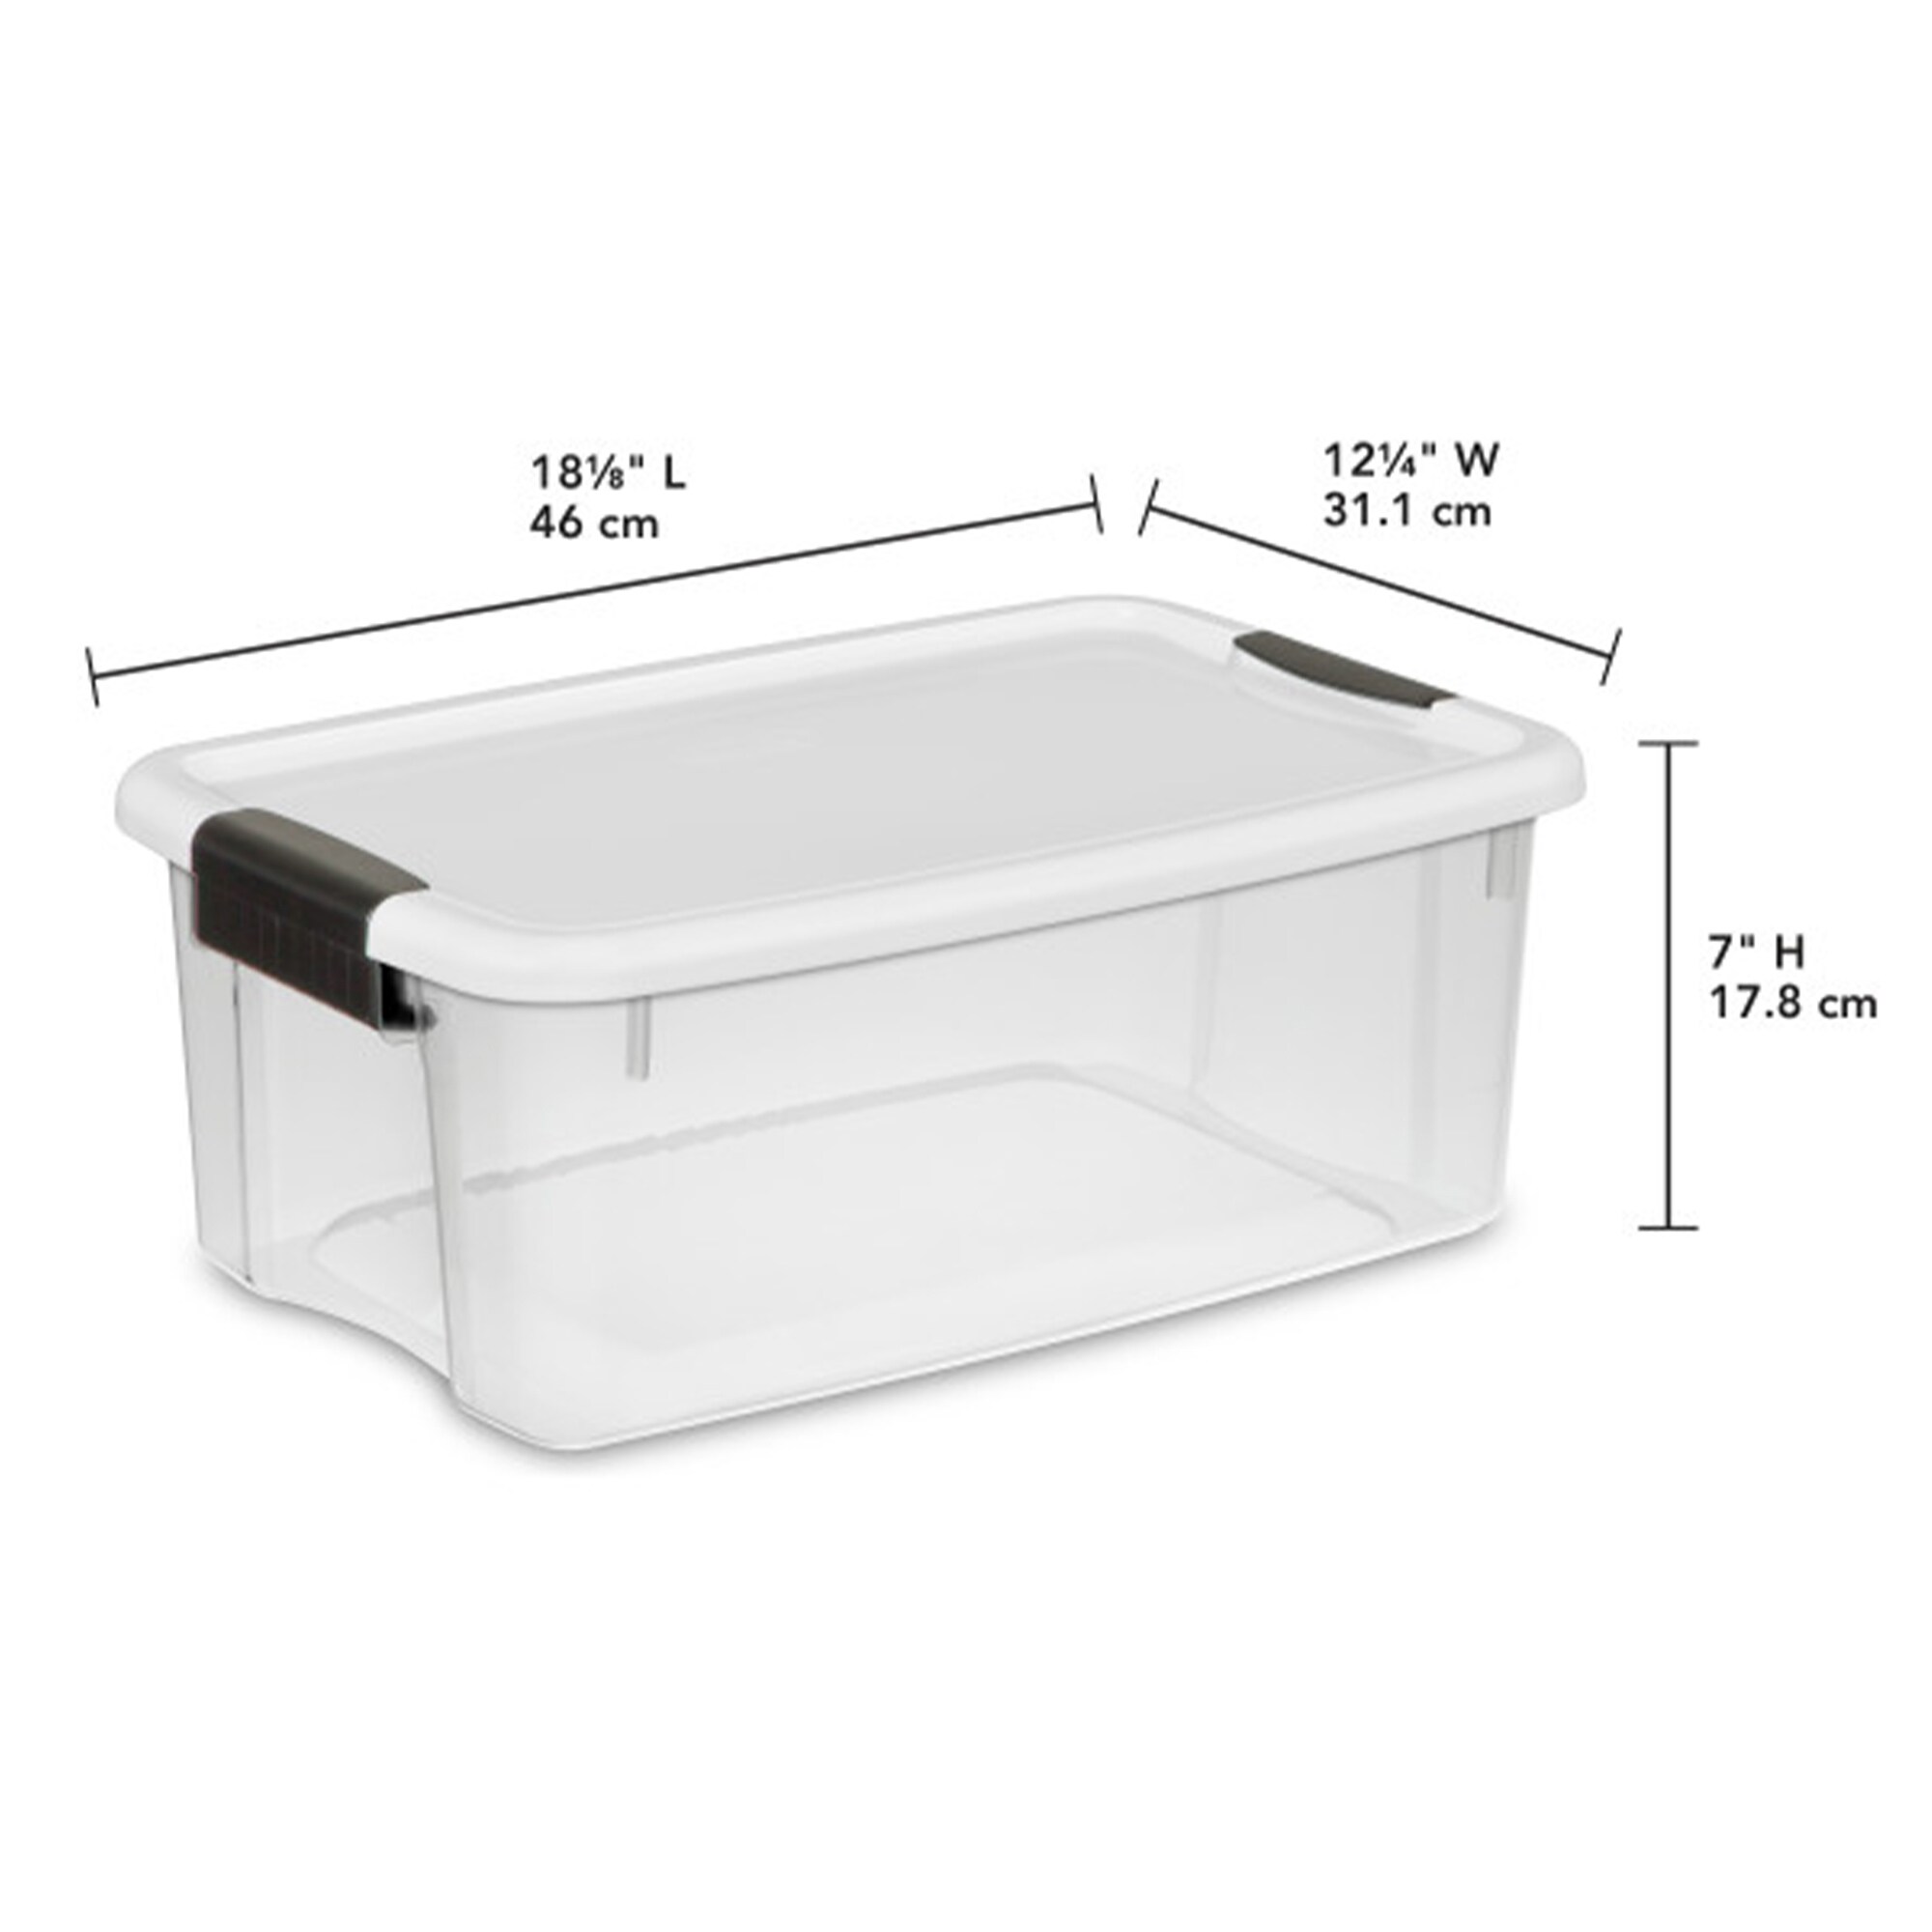 Sterilite 28-Quart Clear Storage Box with Cover See-through Base, 10-Pack